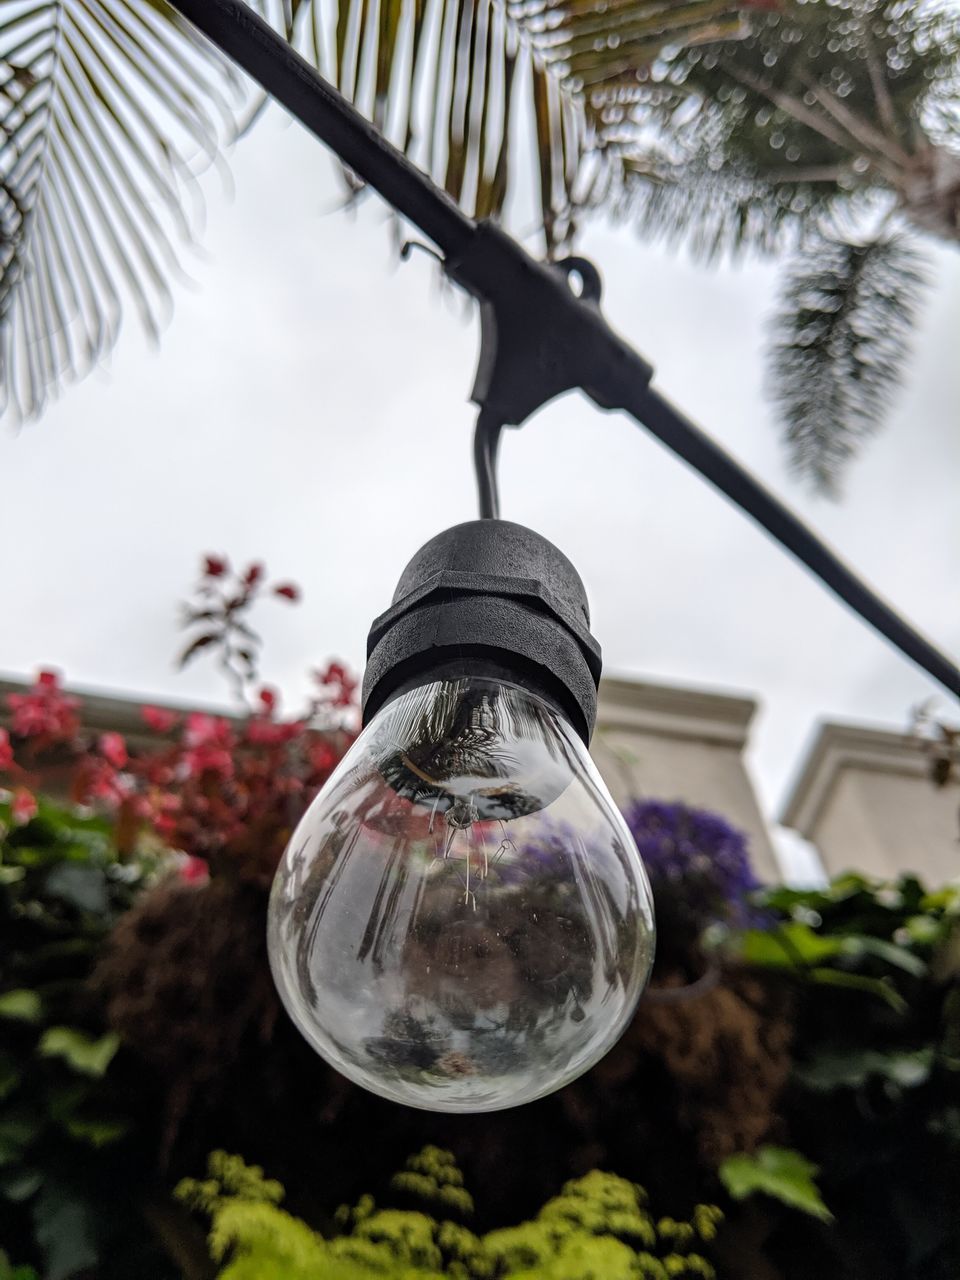 CLOSE-UP OF LIGHT BULB HANGING ON TREE